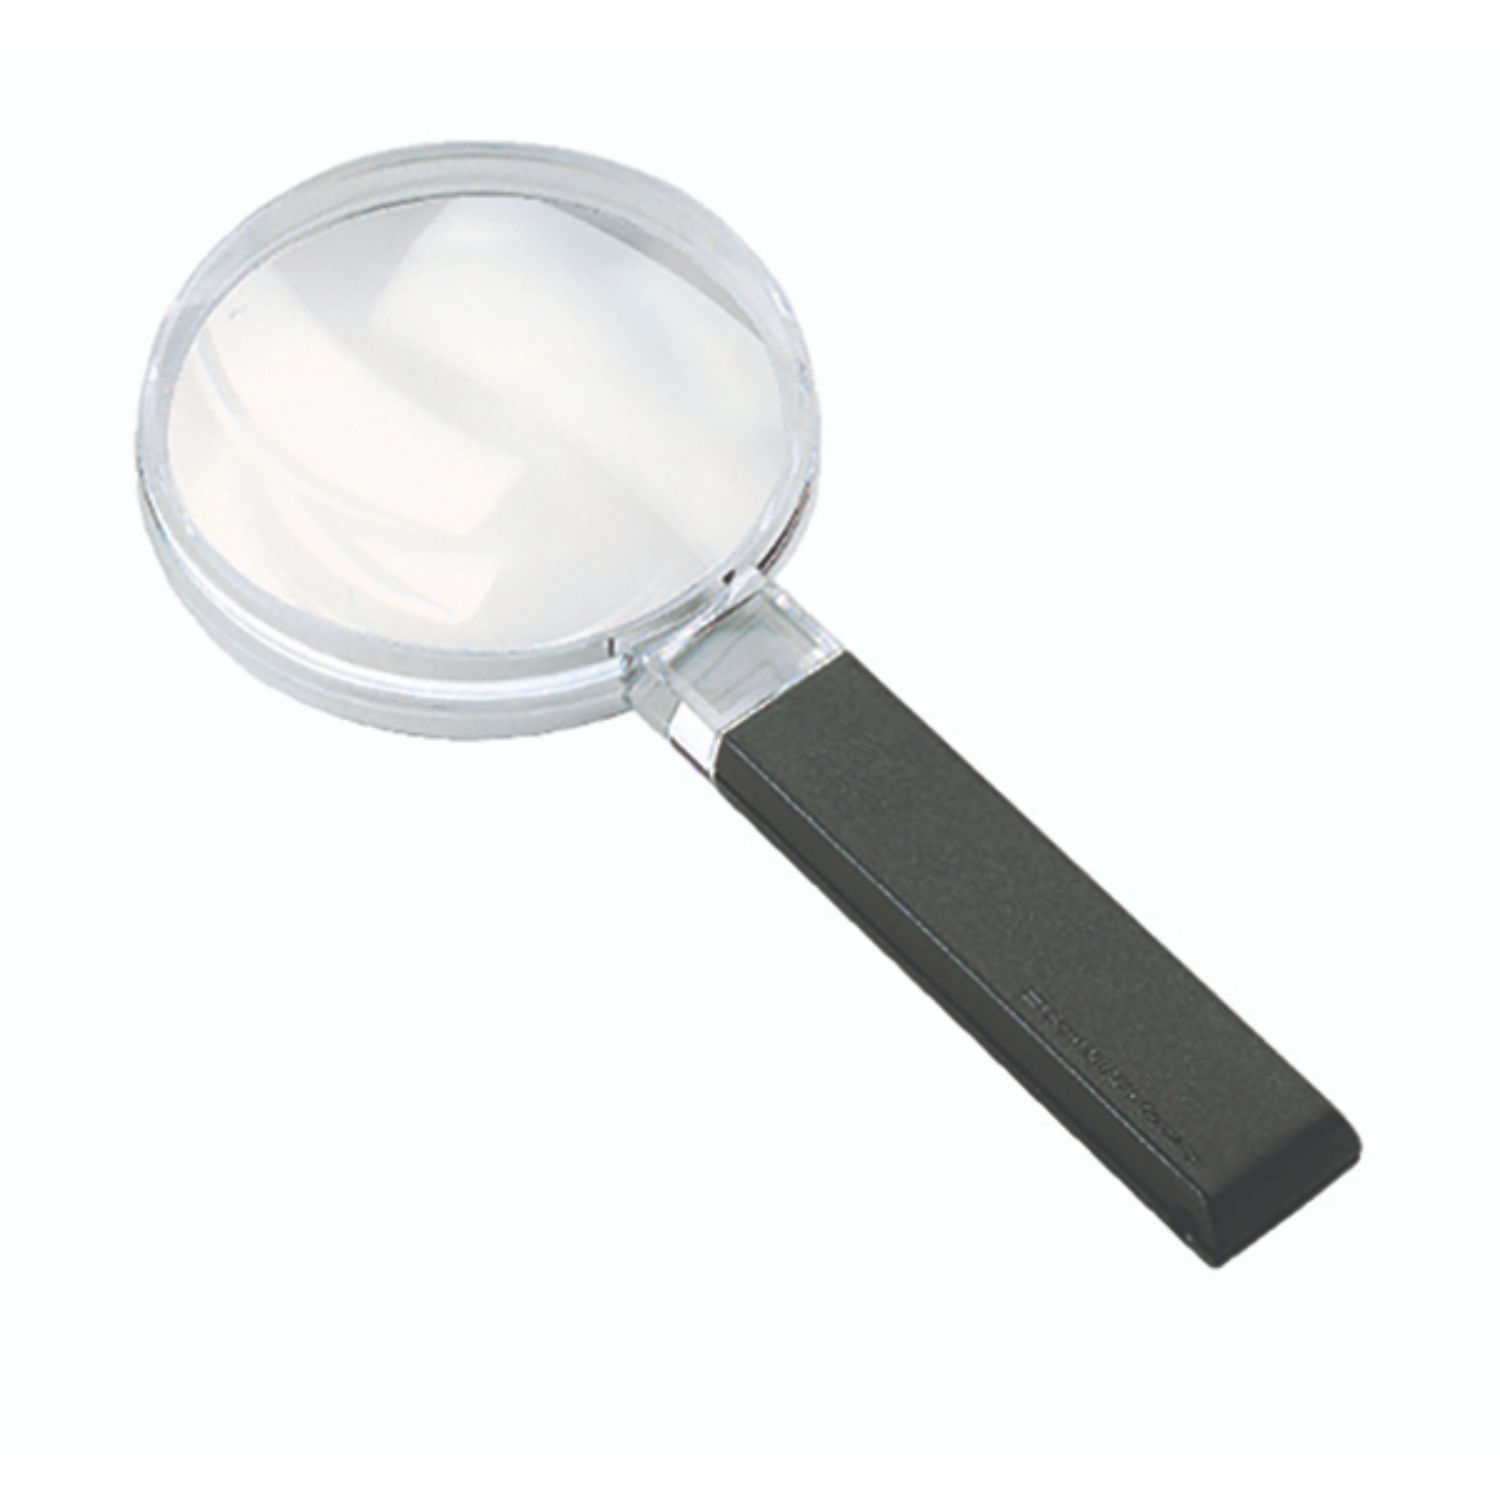 Musuos Handheld Magnifying Glass Magnifiers for Reading Low Vision Hobby  Crafts Office